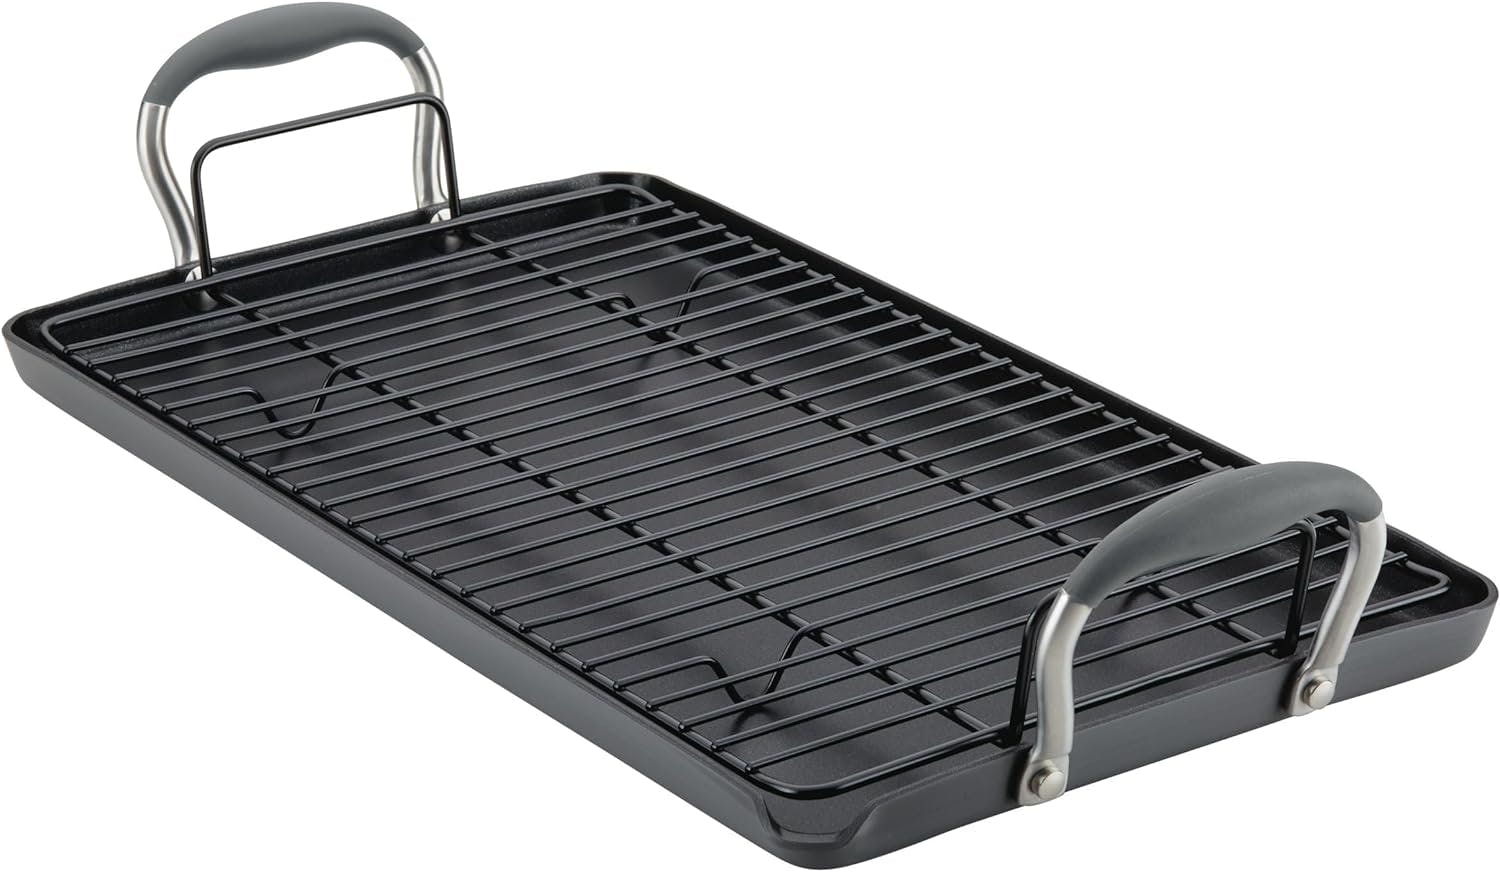 Advanced Home 10"x18" Moonstone Hard-Anodized Double Burner Griddle